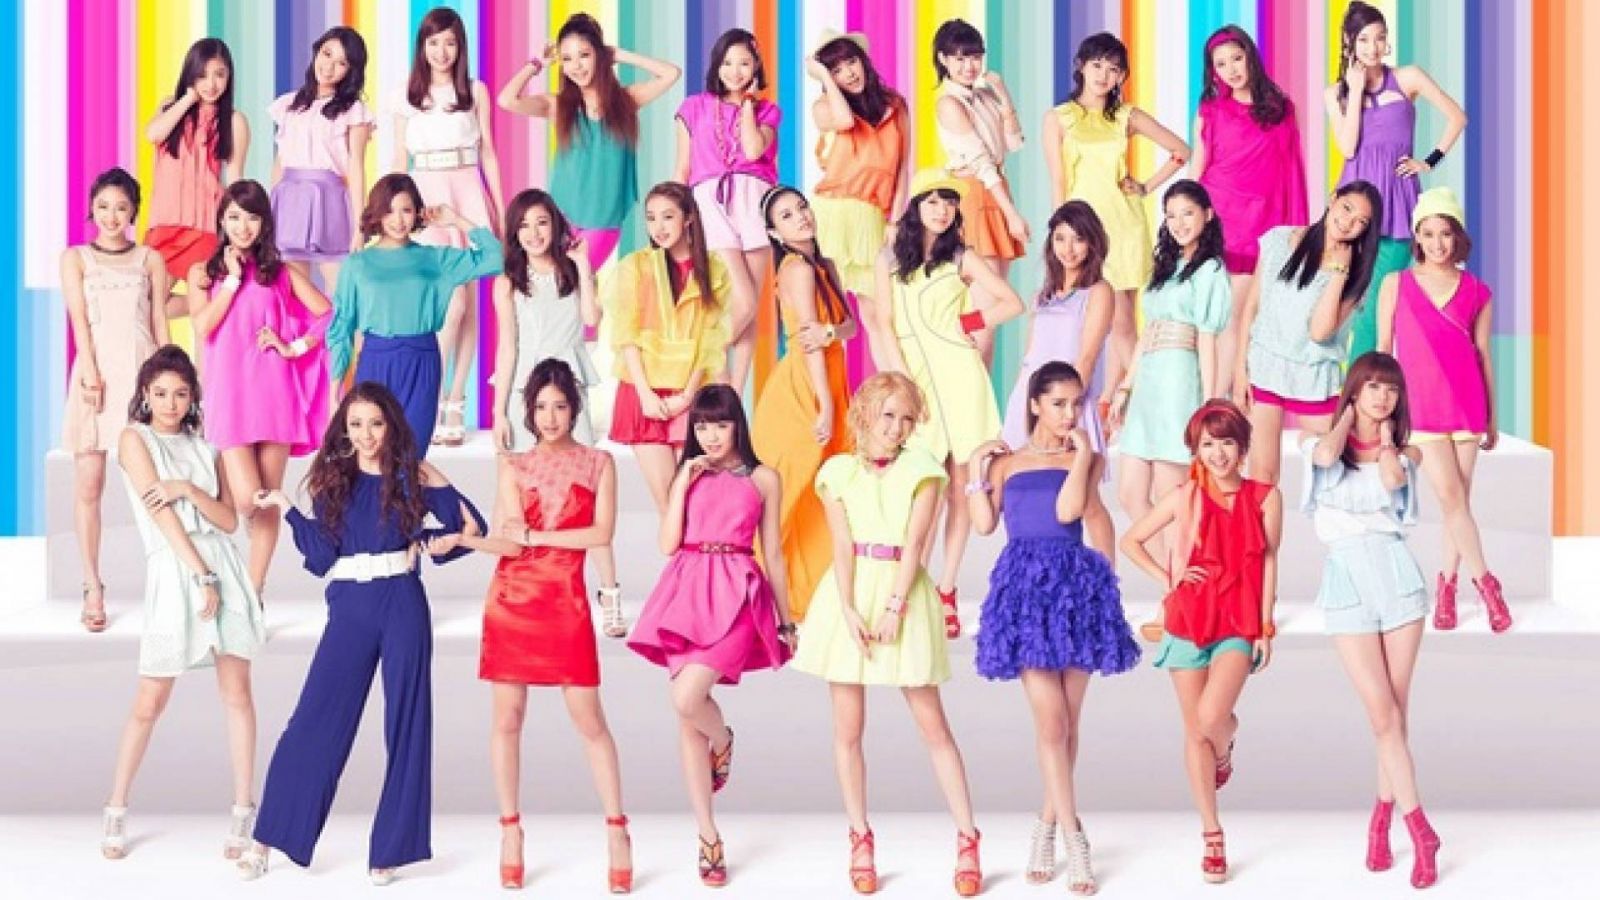 E-girls © avex marketing Inc. All rights reserved.